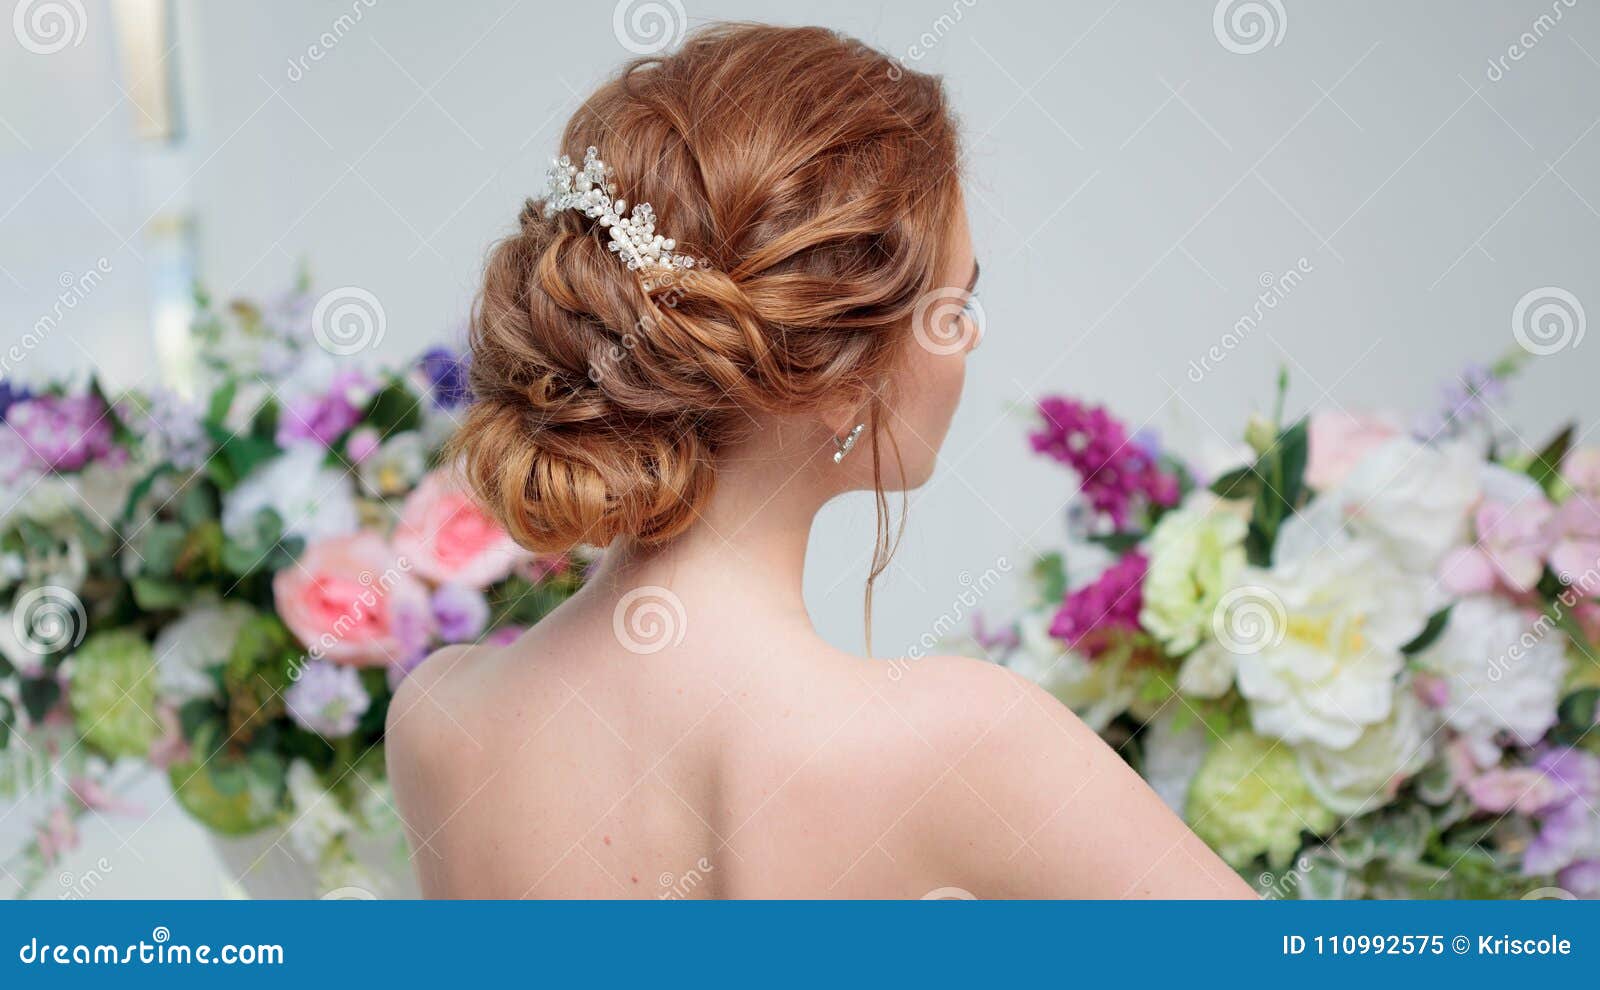 Back View of Amazing Young Bride. Red Head Woman Seat on the Chair. Elegant  Hairstyle Stock Image - Image of ginger, charming: 110992575